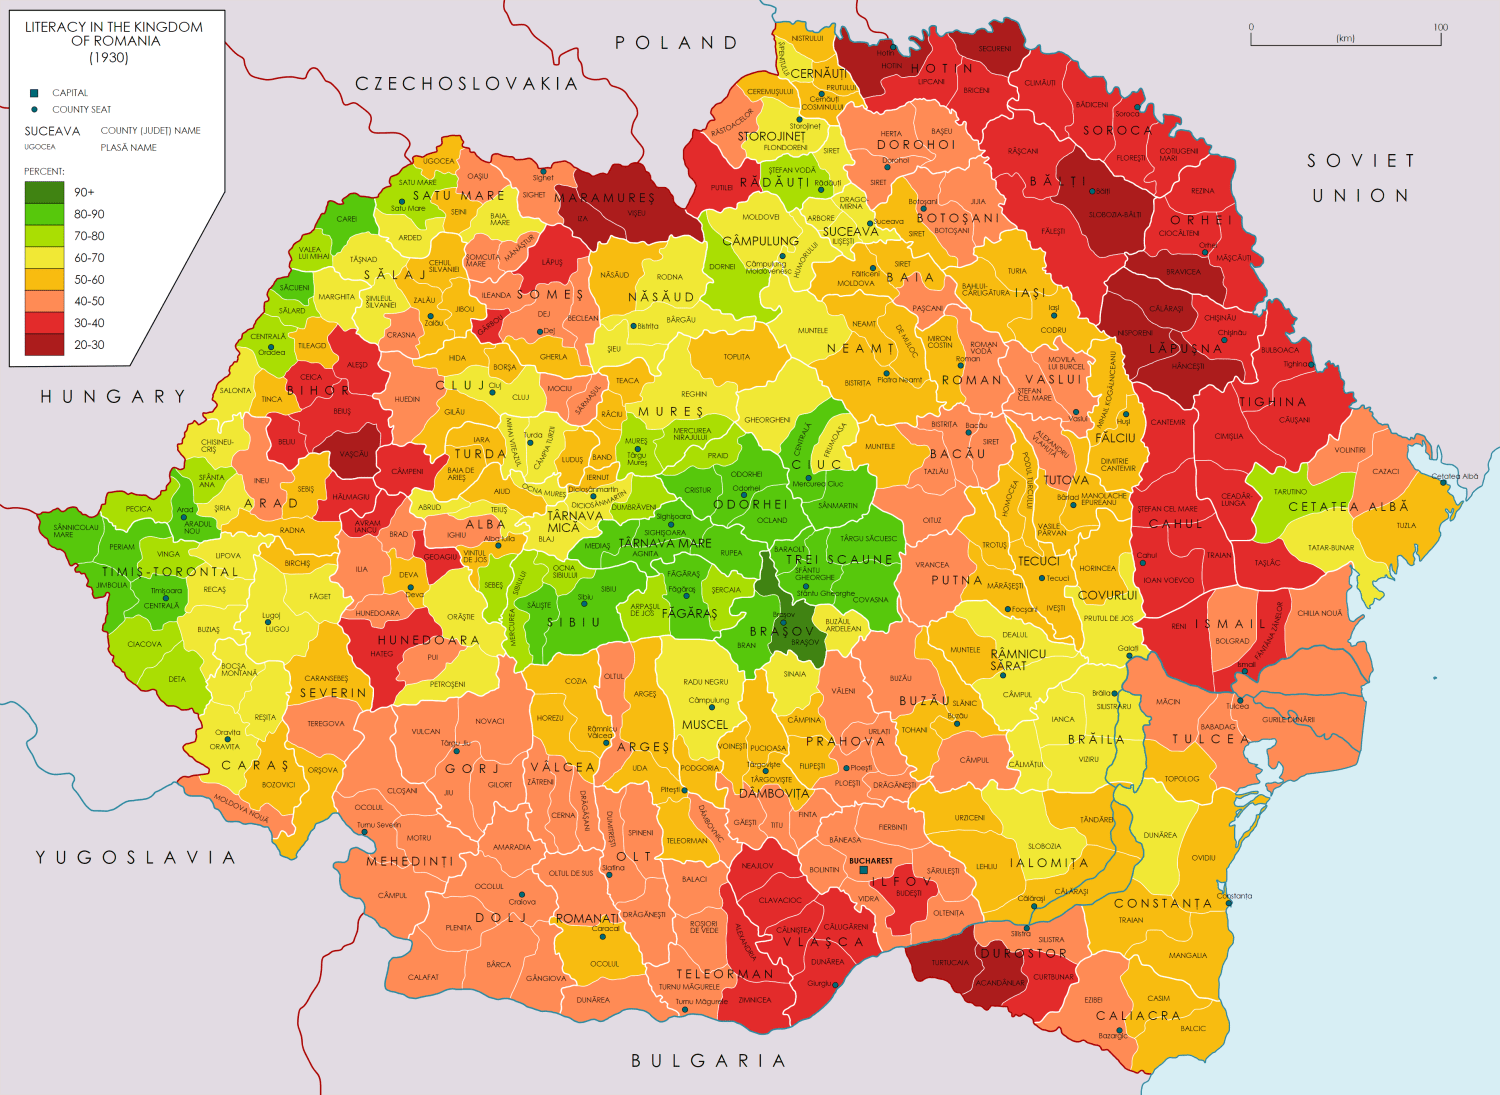 Literacy rate in the Kingdom of Romania ( 1930 )